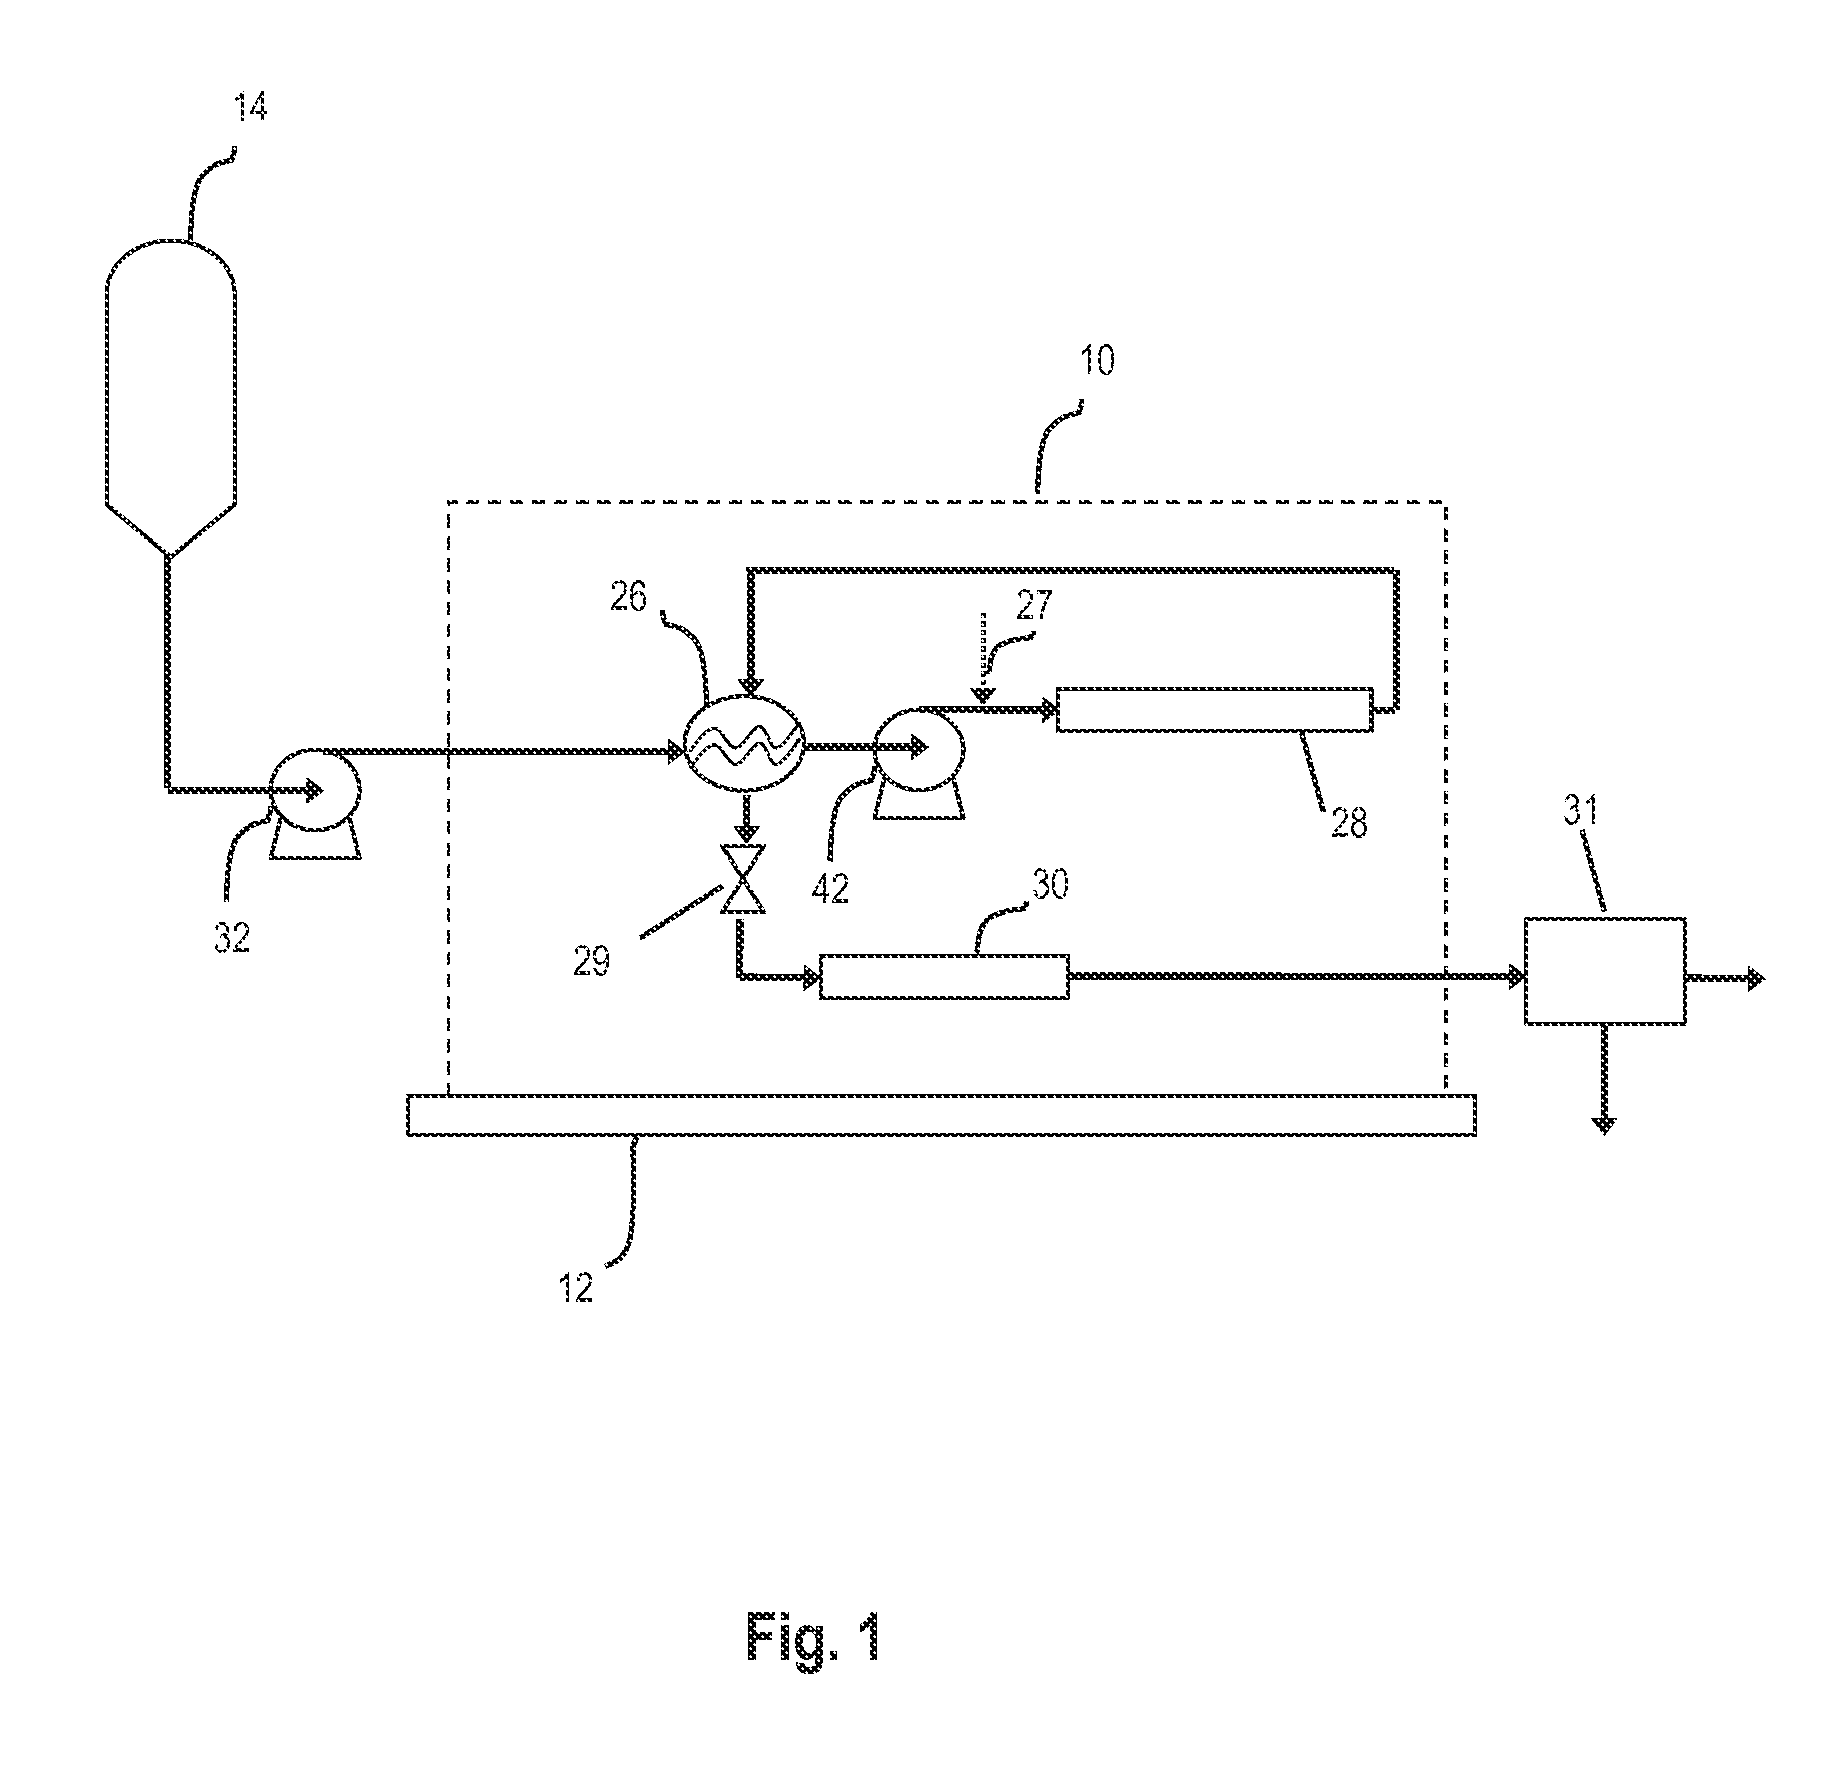 Mobile thermal treatment method for processing organic material